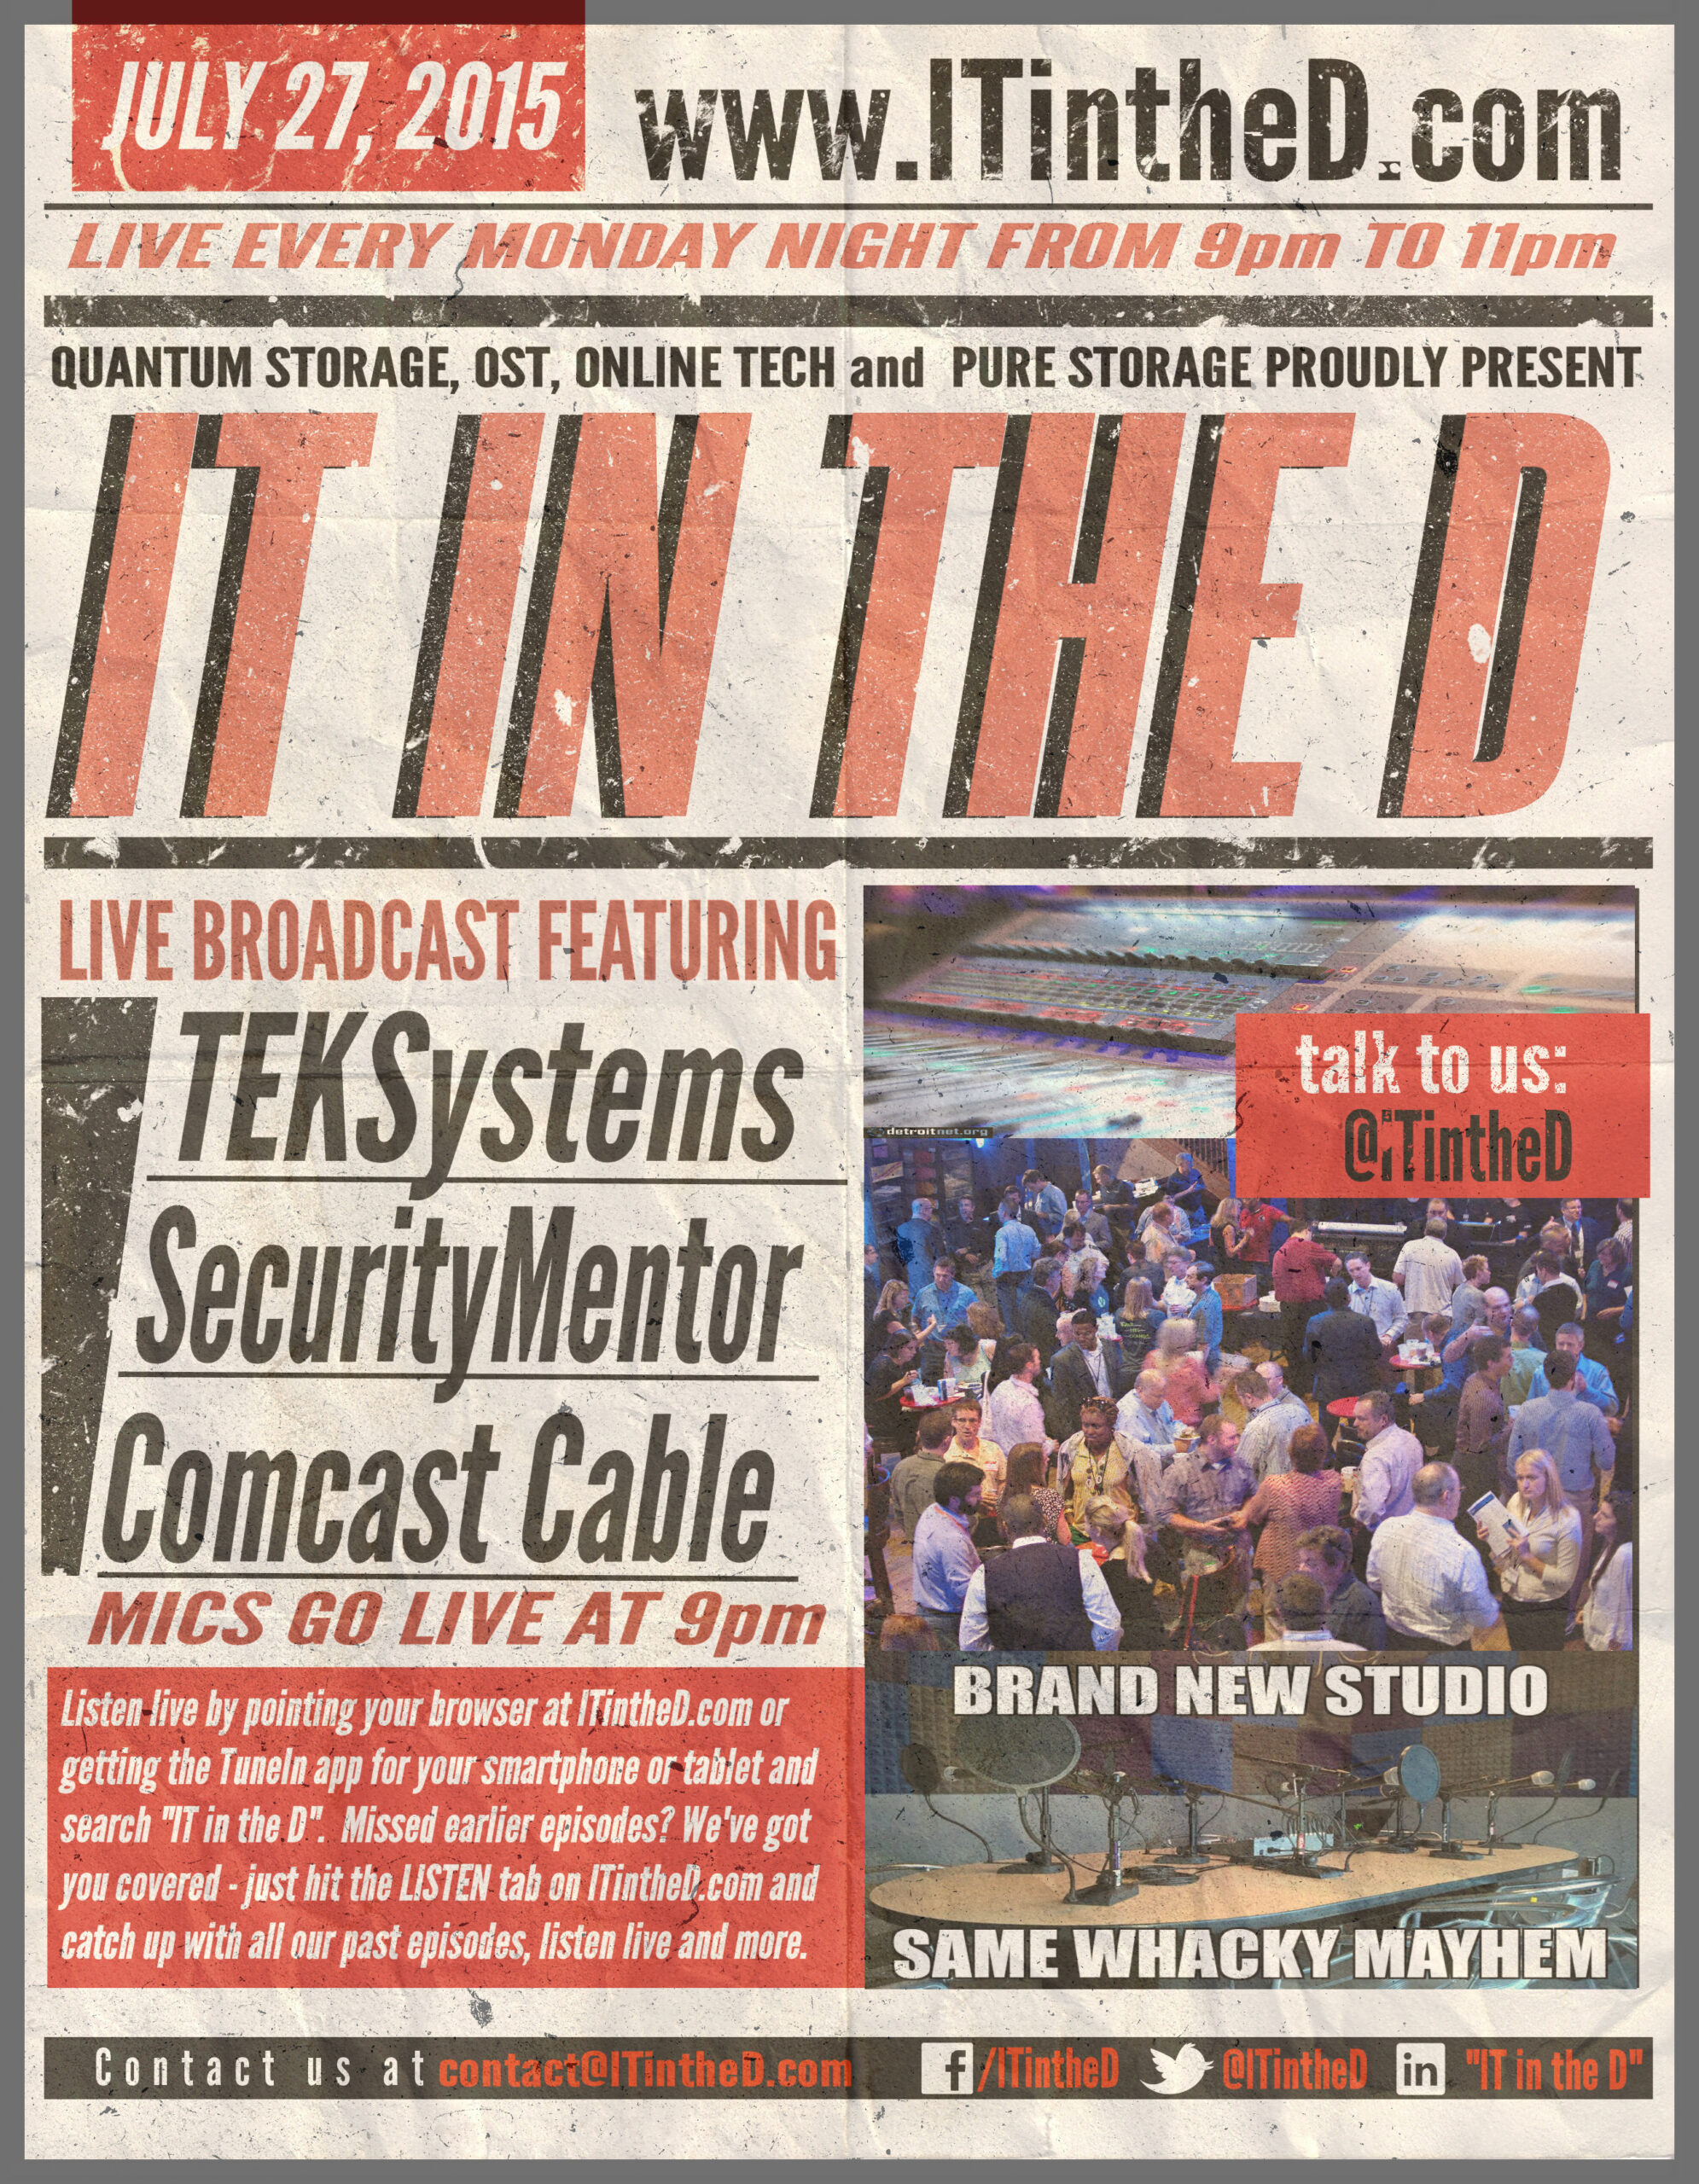 TEKSystems, SecurityMentor, Comcast In-Studio, We Launch a Podcast Network and More for 7/27/2015